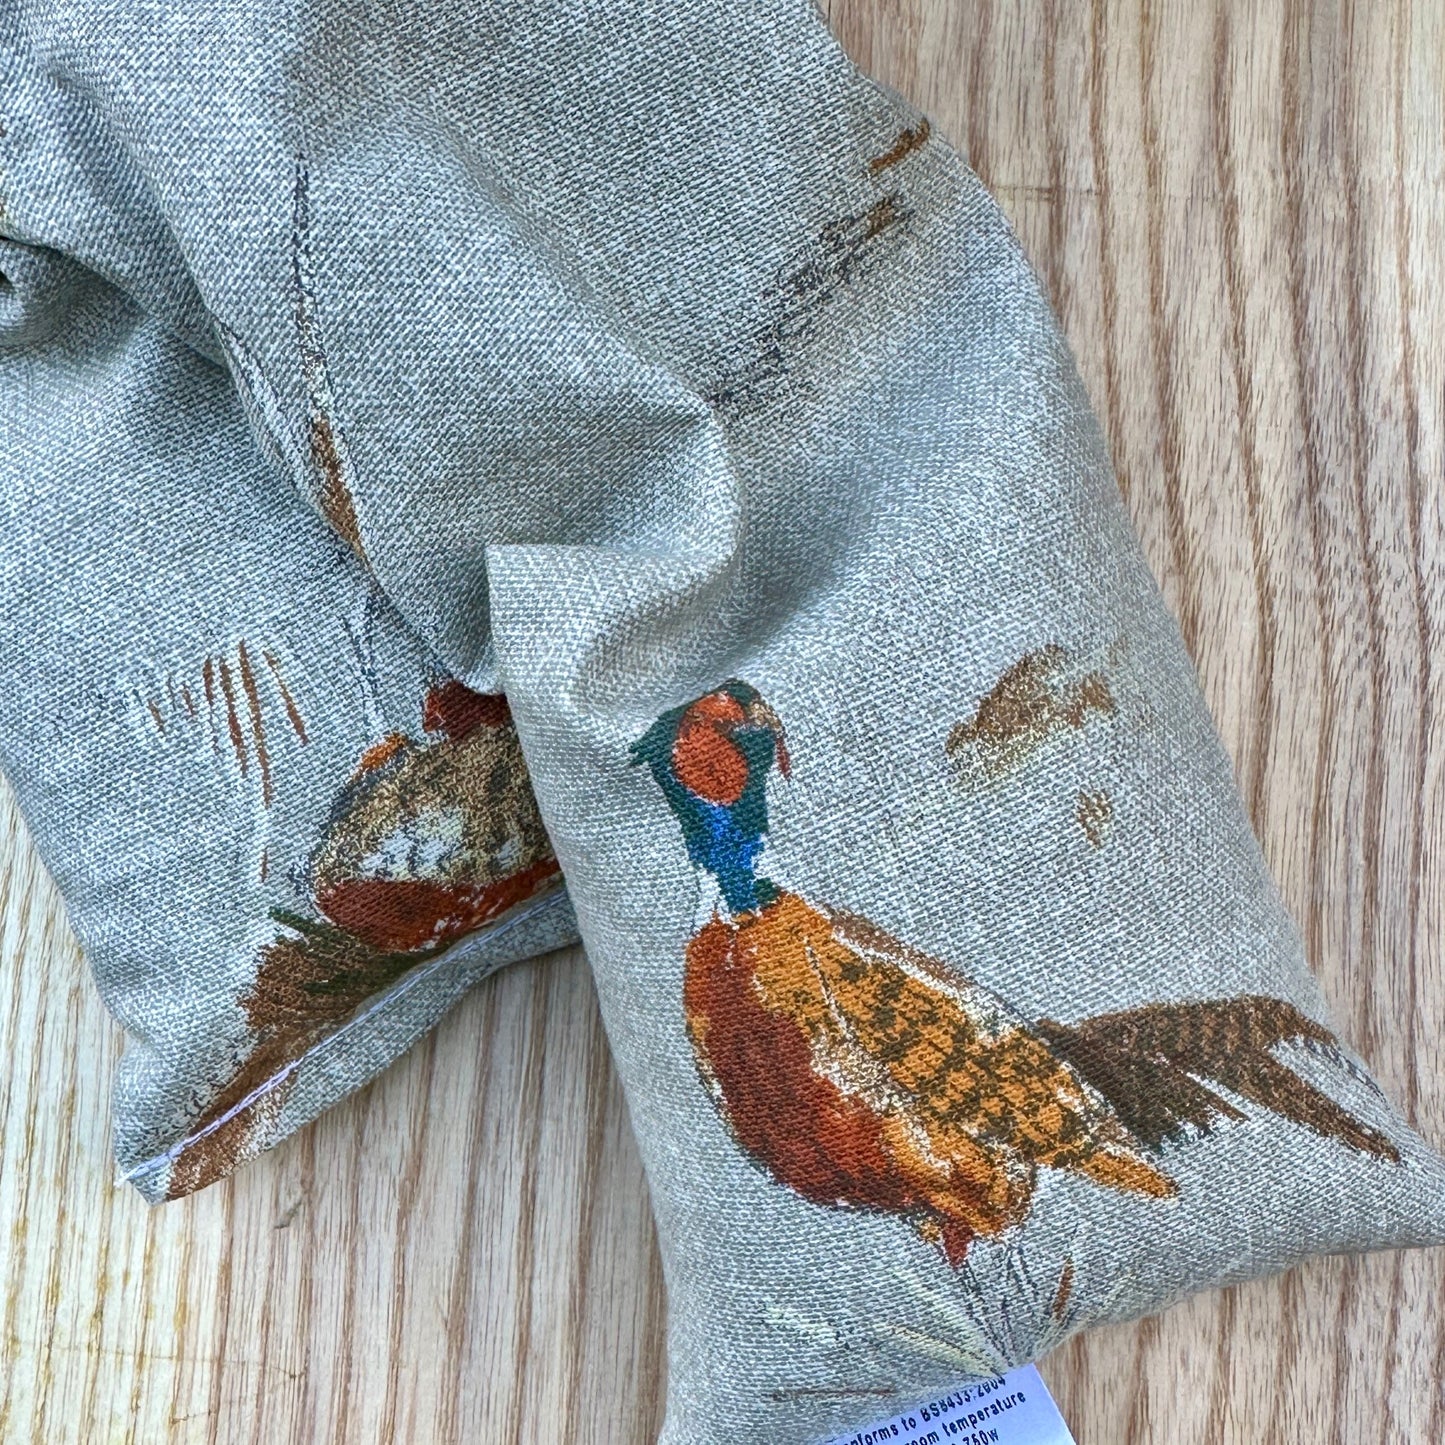 Pheasant printed, microwave lavender wheat bag. Lavender scented stress relieving, warming neck wrap